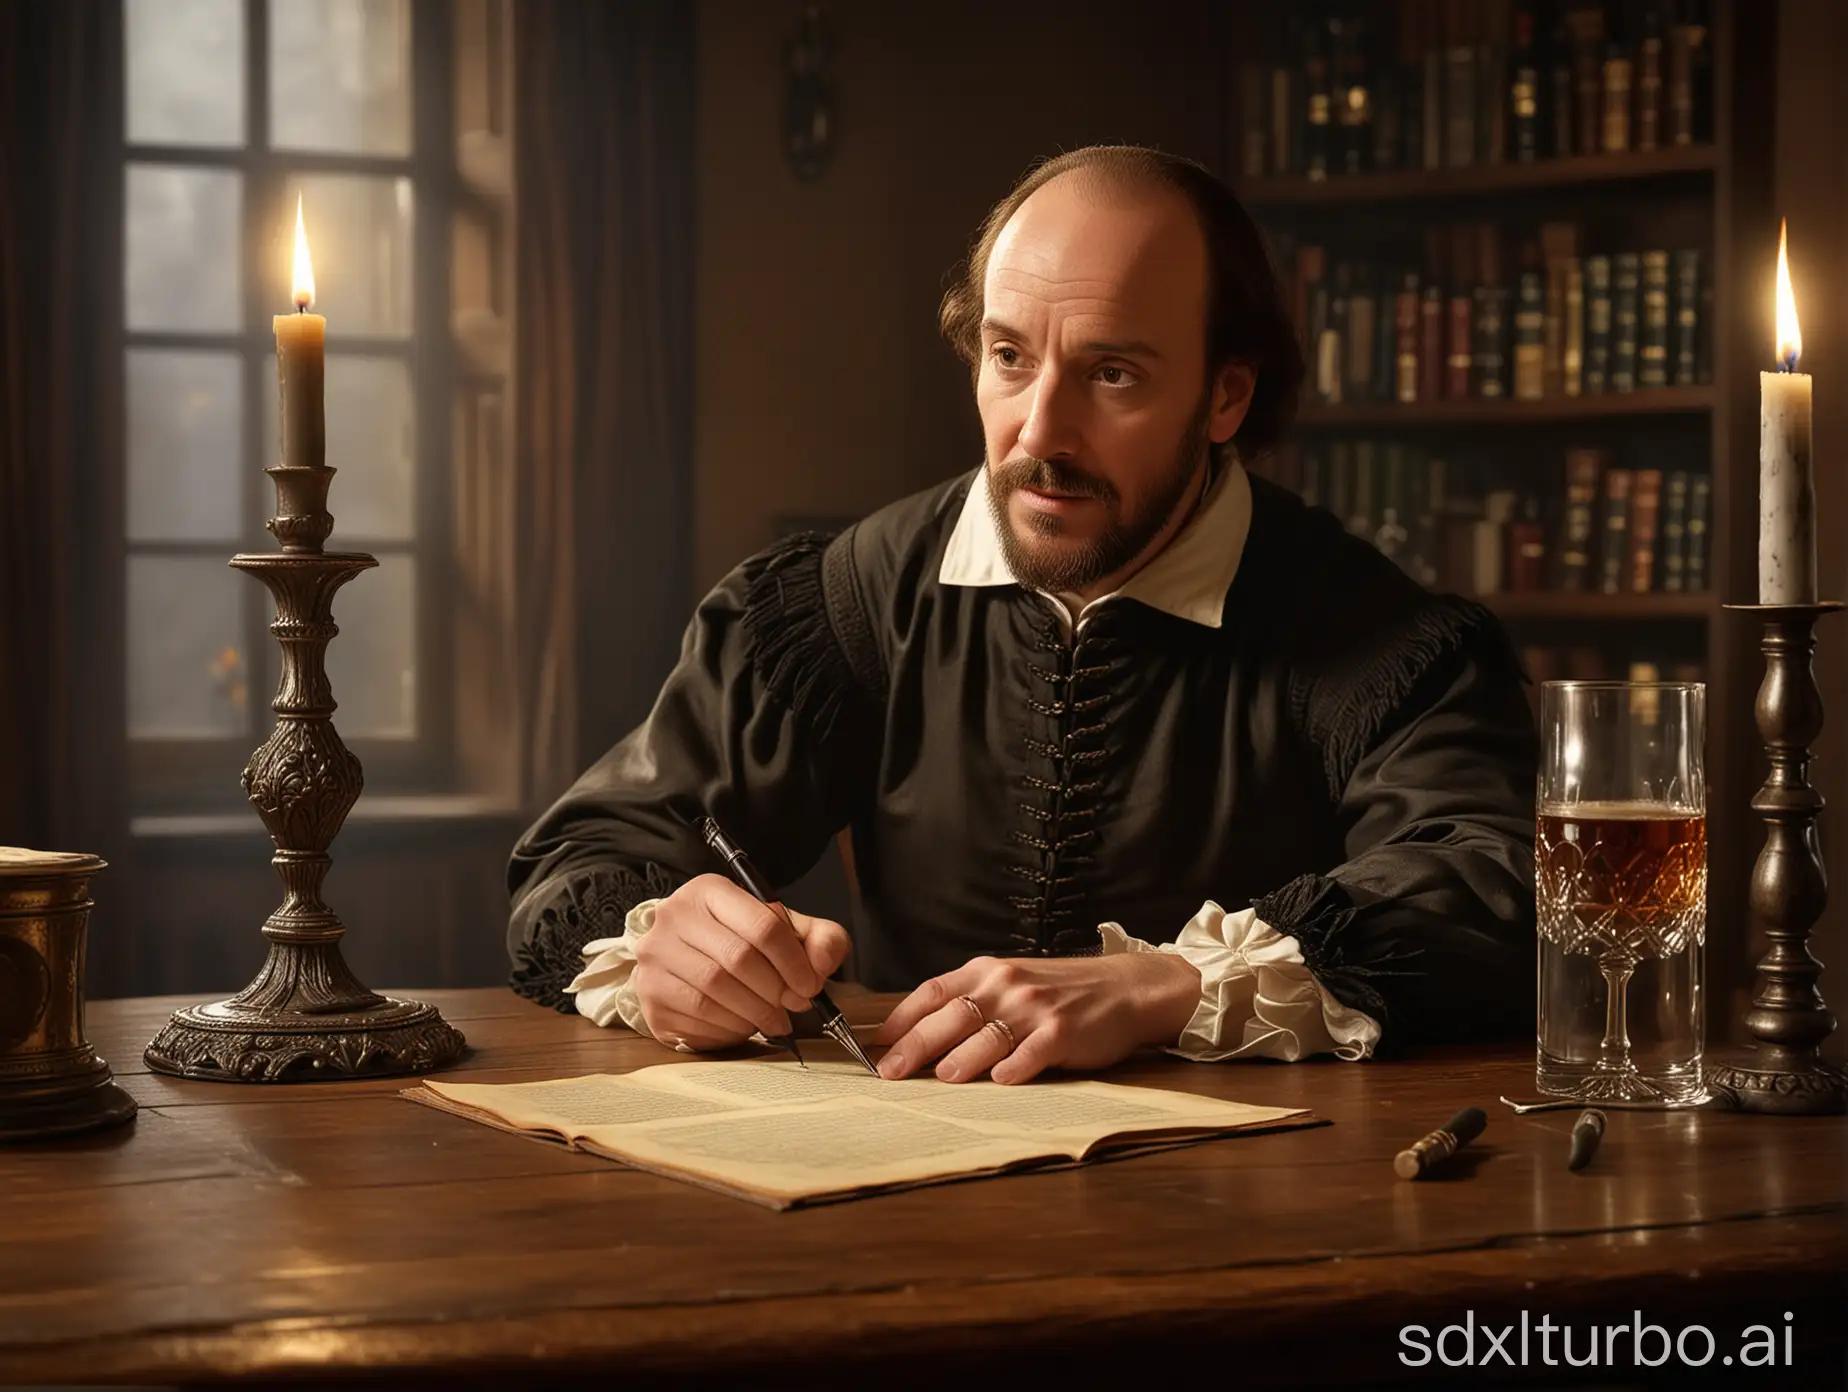 Great play writer William Shakespear is sitting at his oak desk with one large pint glass of British ale beer at his vintage while writing out a new Theatrical play with a vintage feathered fountain pen by the light of a candle.  This is to be a very Photo realistic high resolution HD rendering.